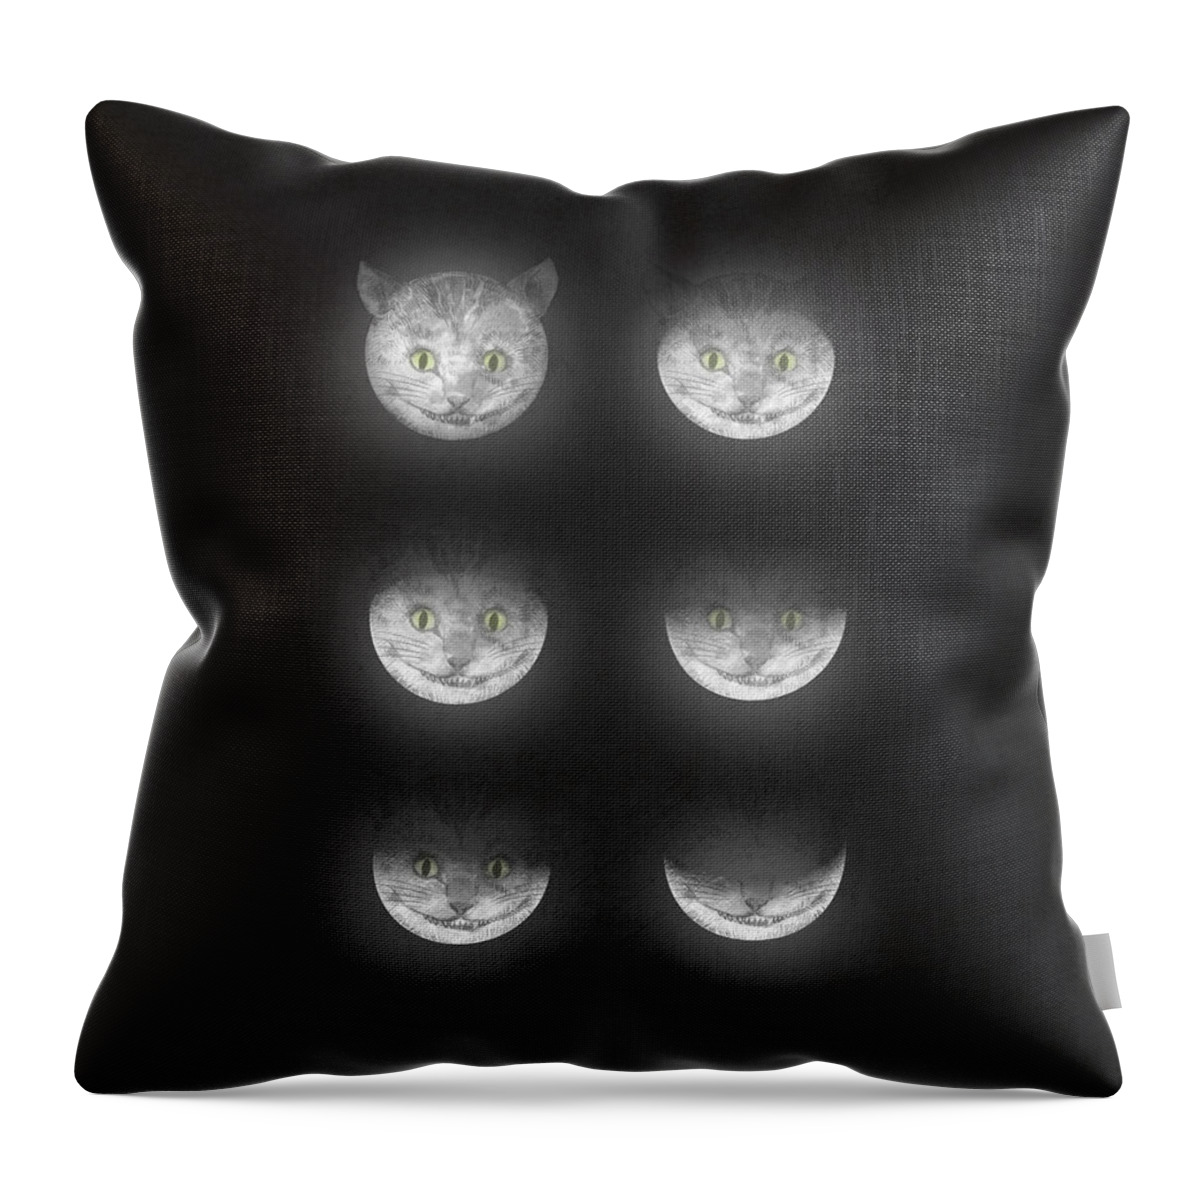 Cats Throw Pillow featuring the drawing Waning Cheshire by Eric Fan